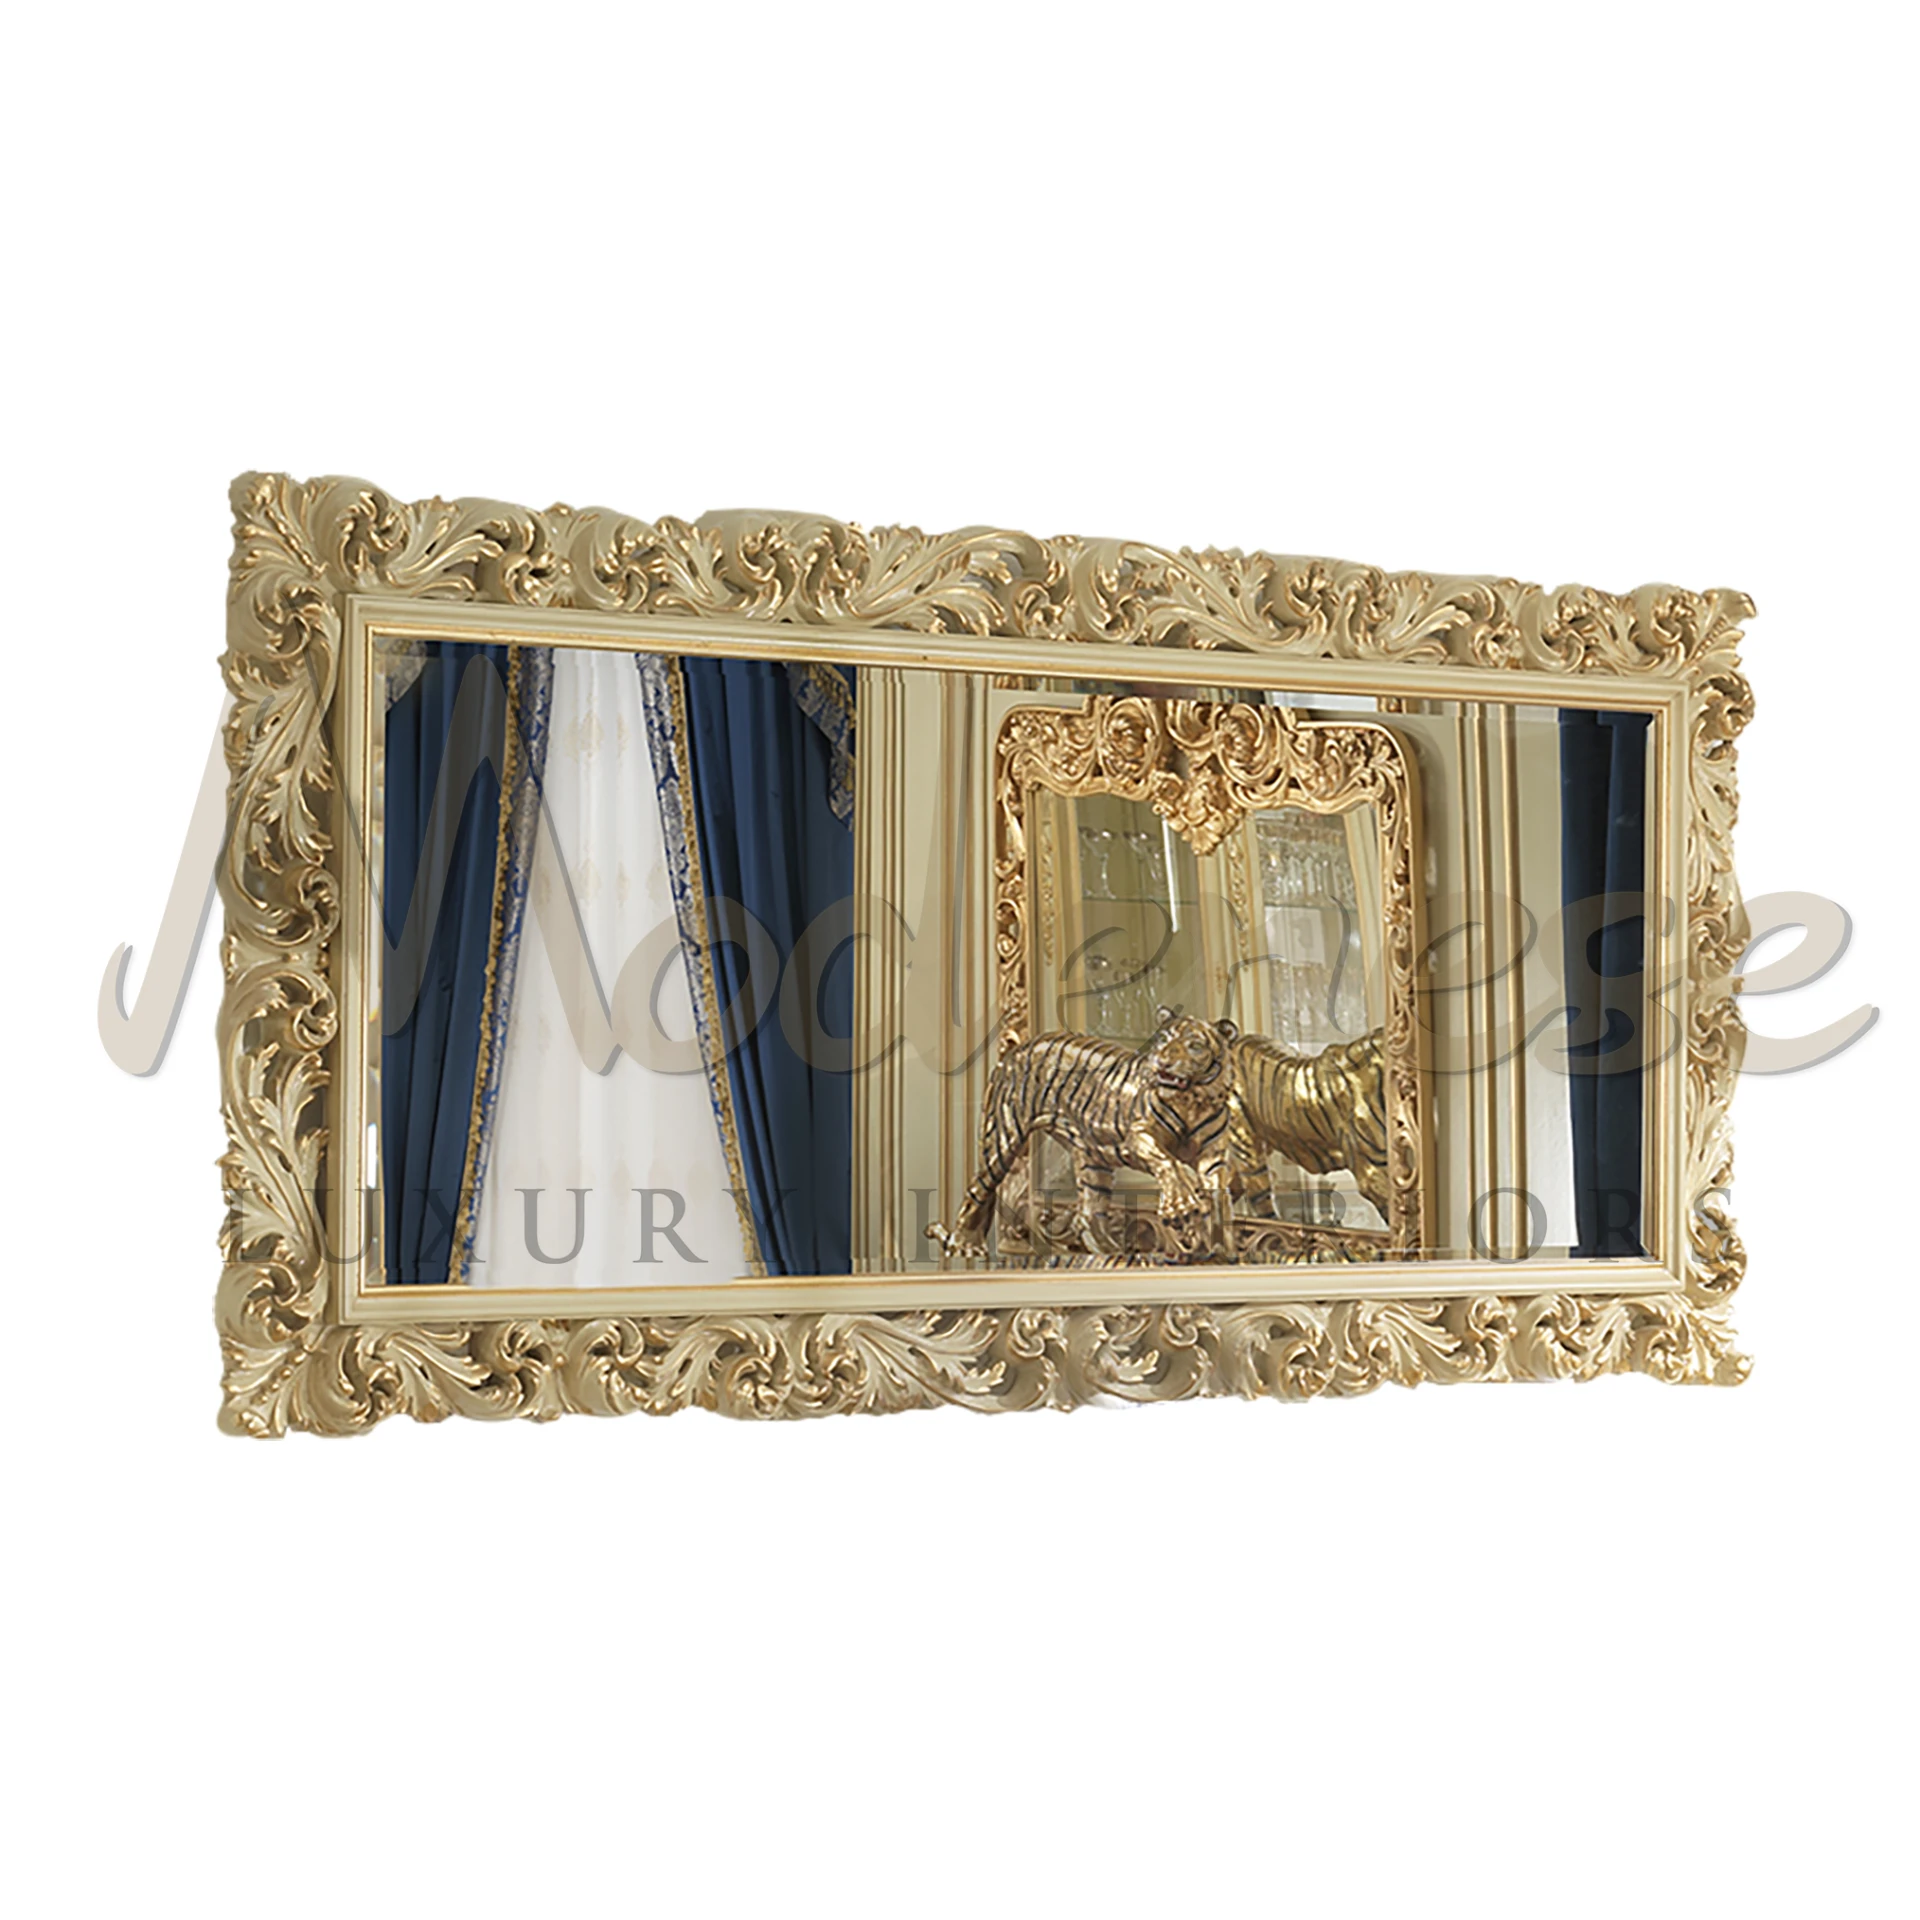 Luxurious Gilded Italian Mirror, hand-made with classic baroque embellishments, enhancing interior design.